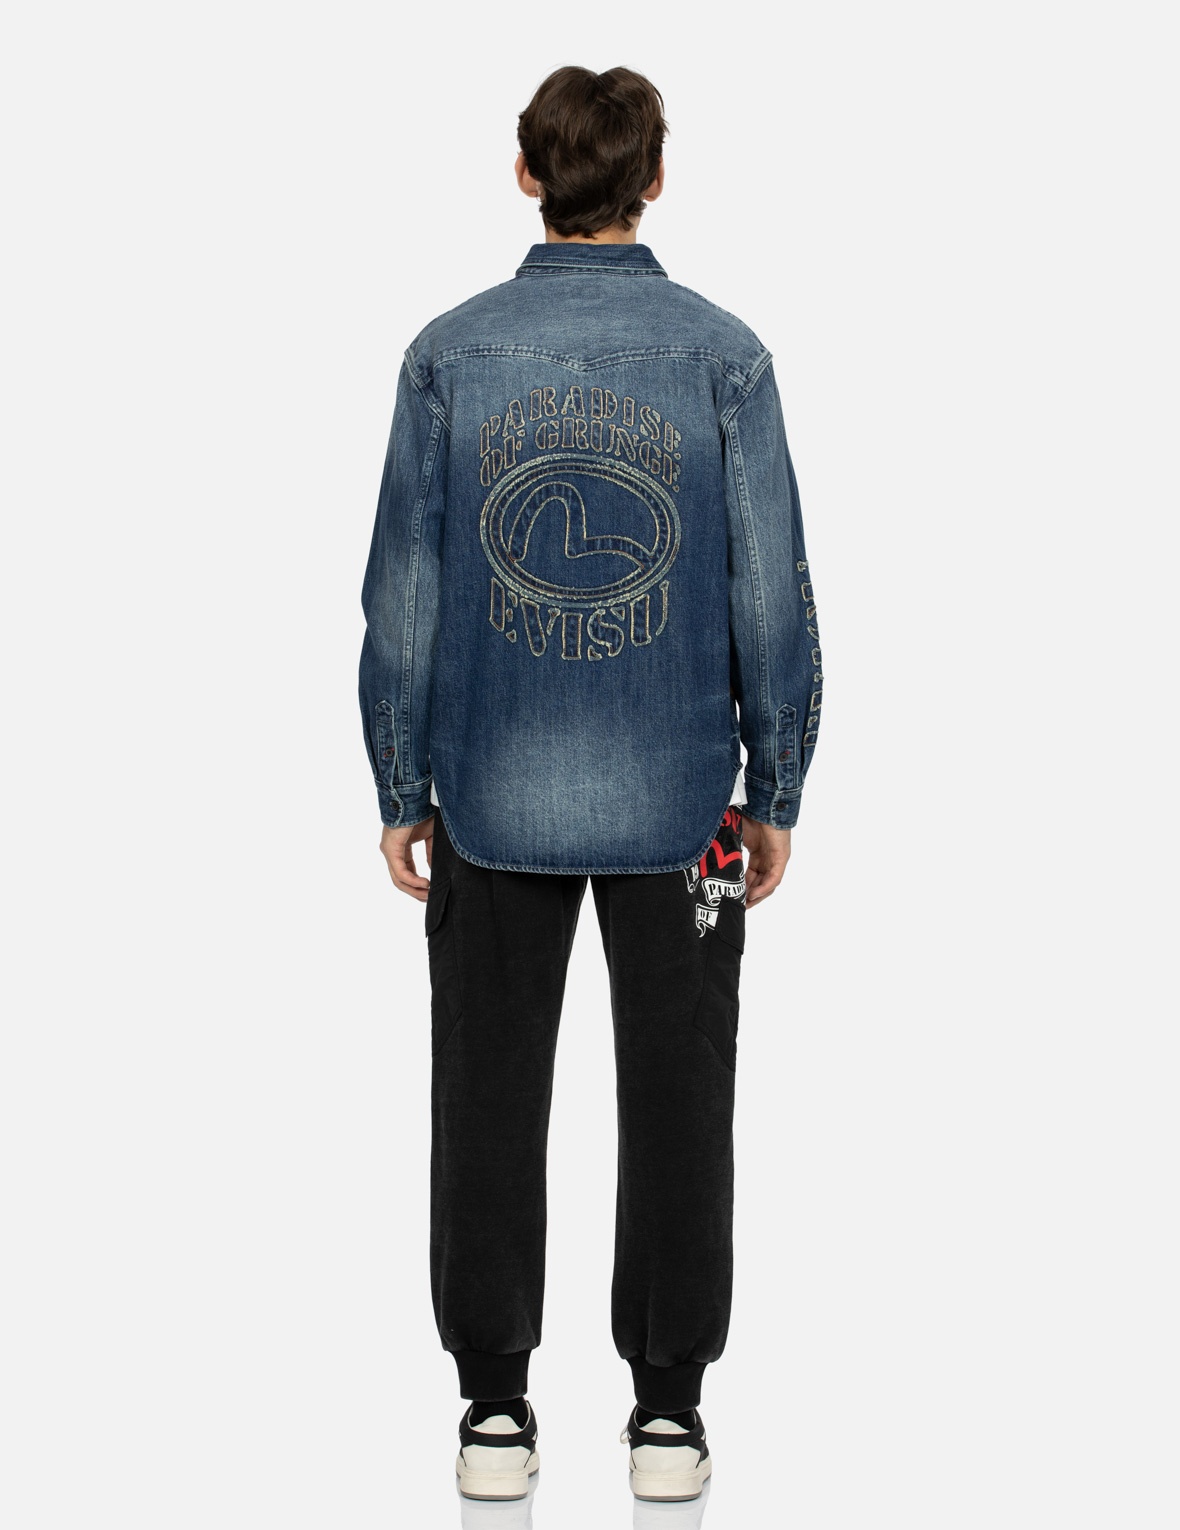 GRUNGE STYLE LOGO AND SEAGULL APPLIQUÉ RELAX FIT DENIM SHIRT - 5